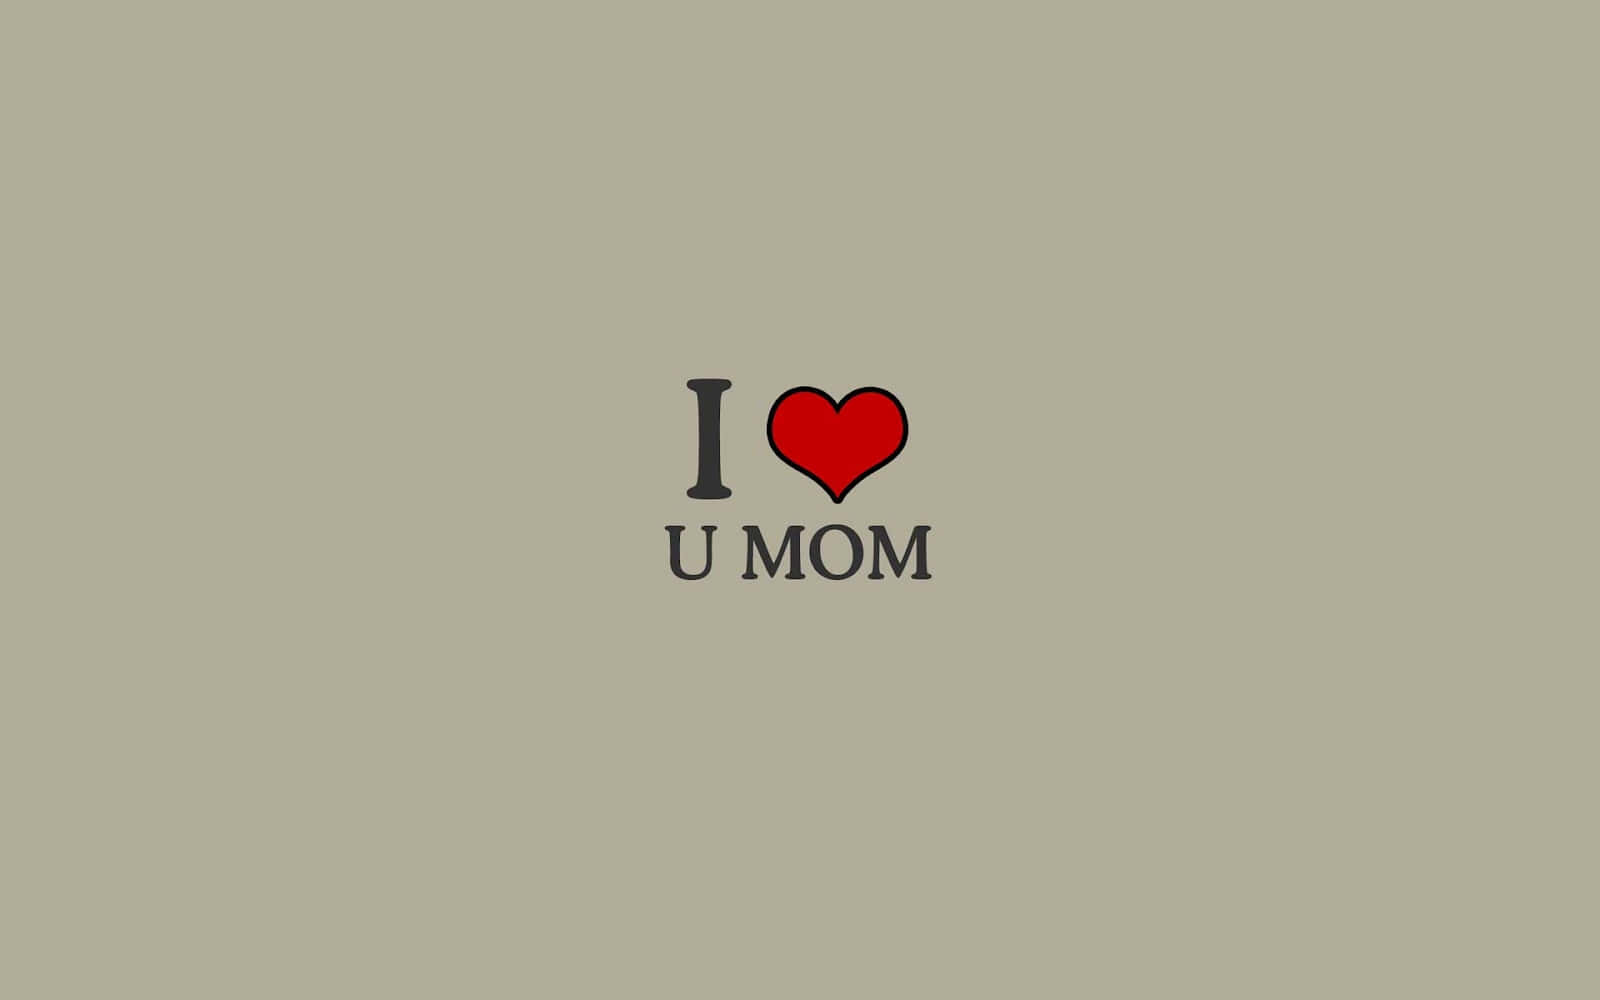 Show Your Best Mom Love With A Beautiful Wish. Wallpaper